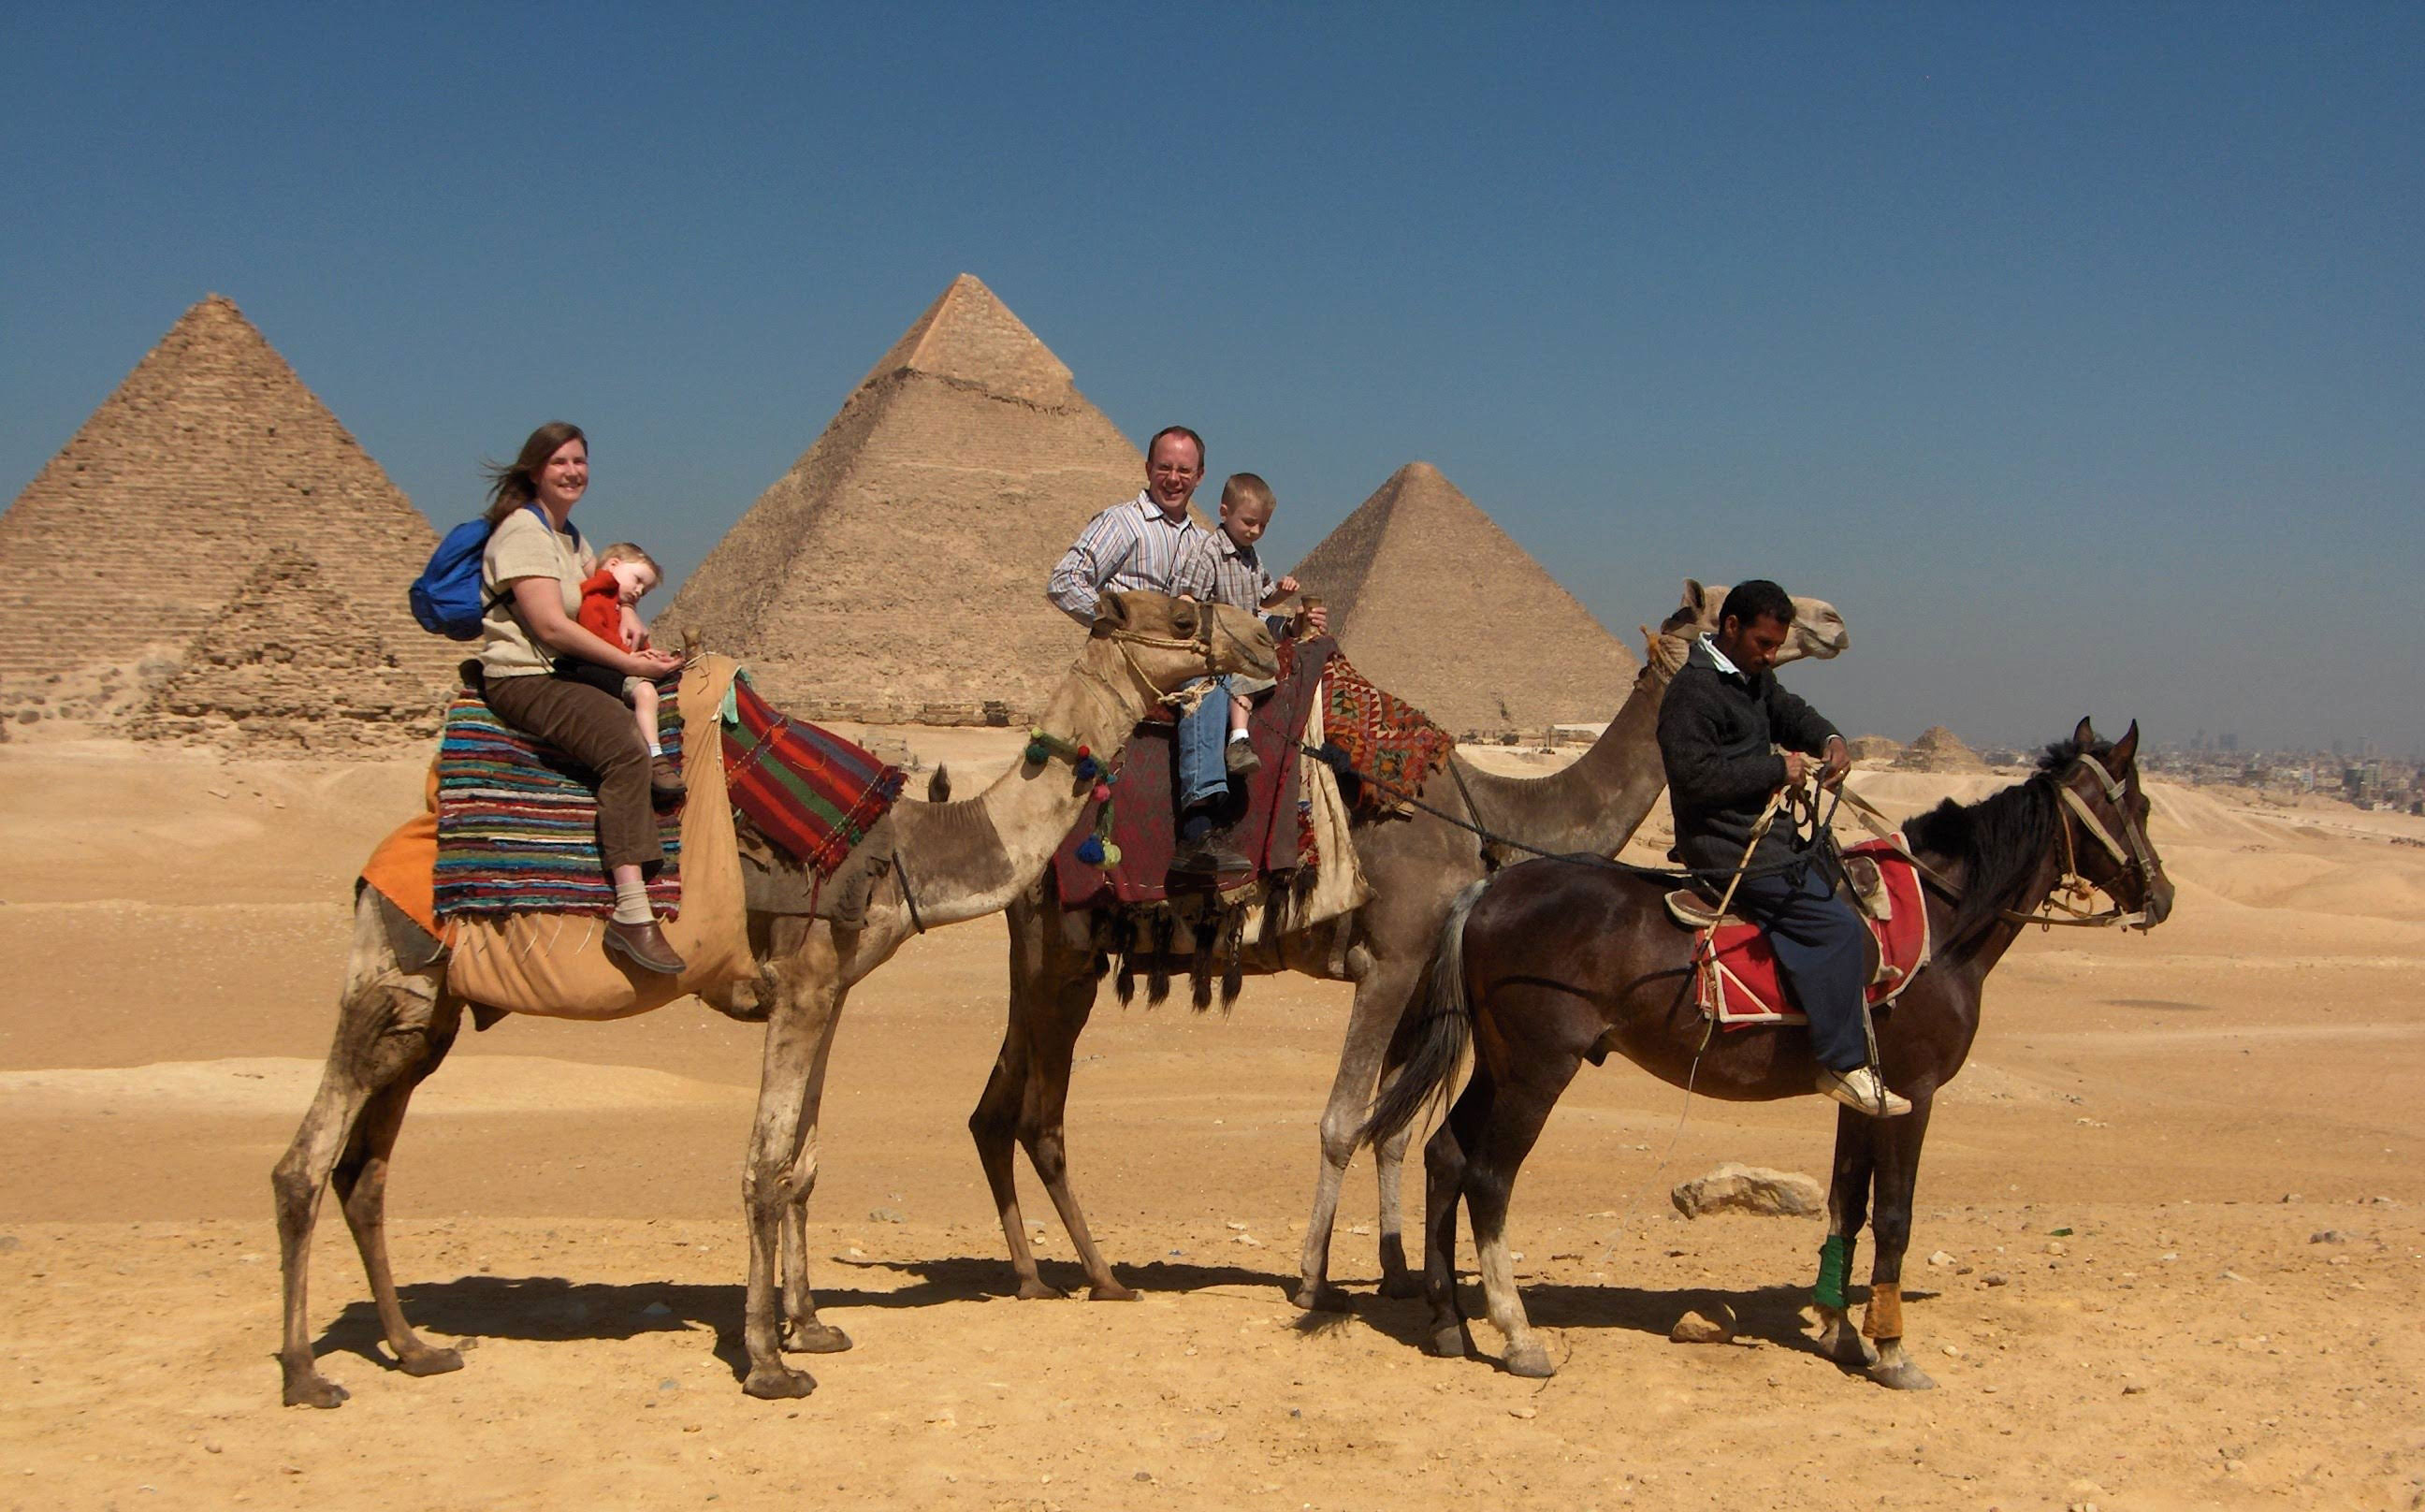 On camels at the pyramids